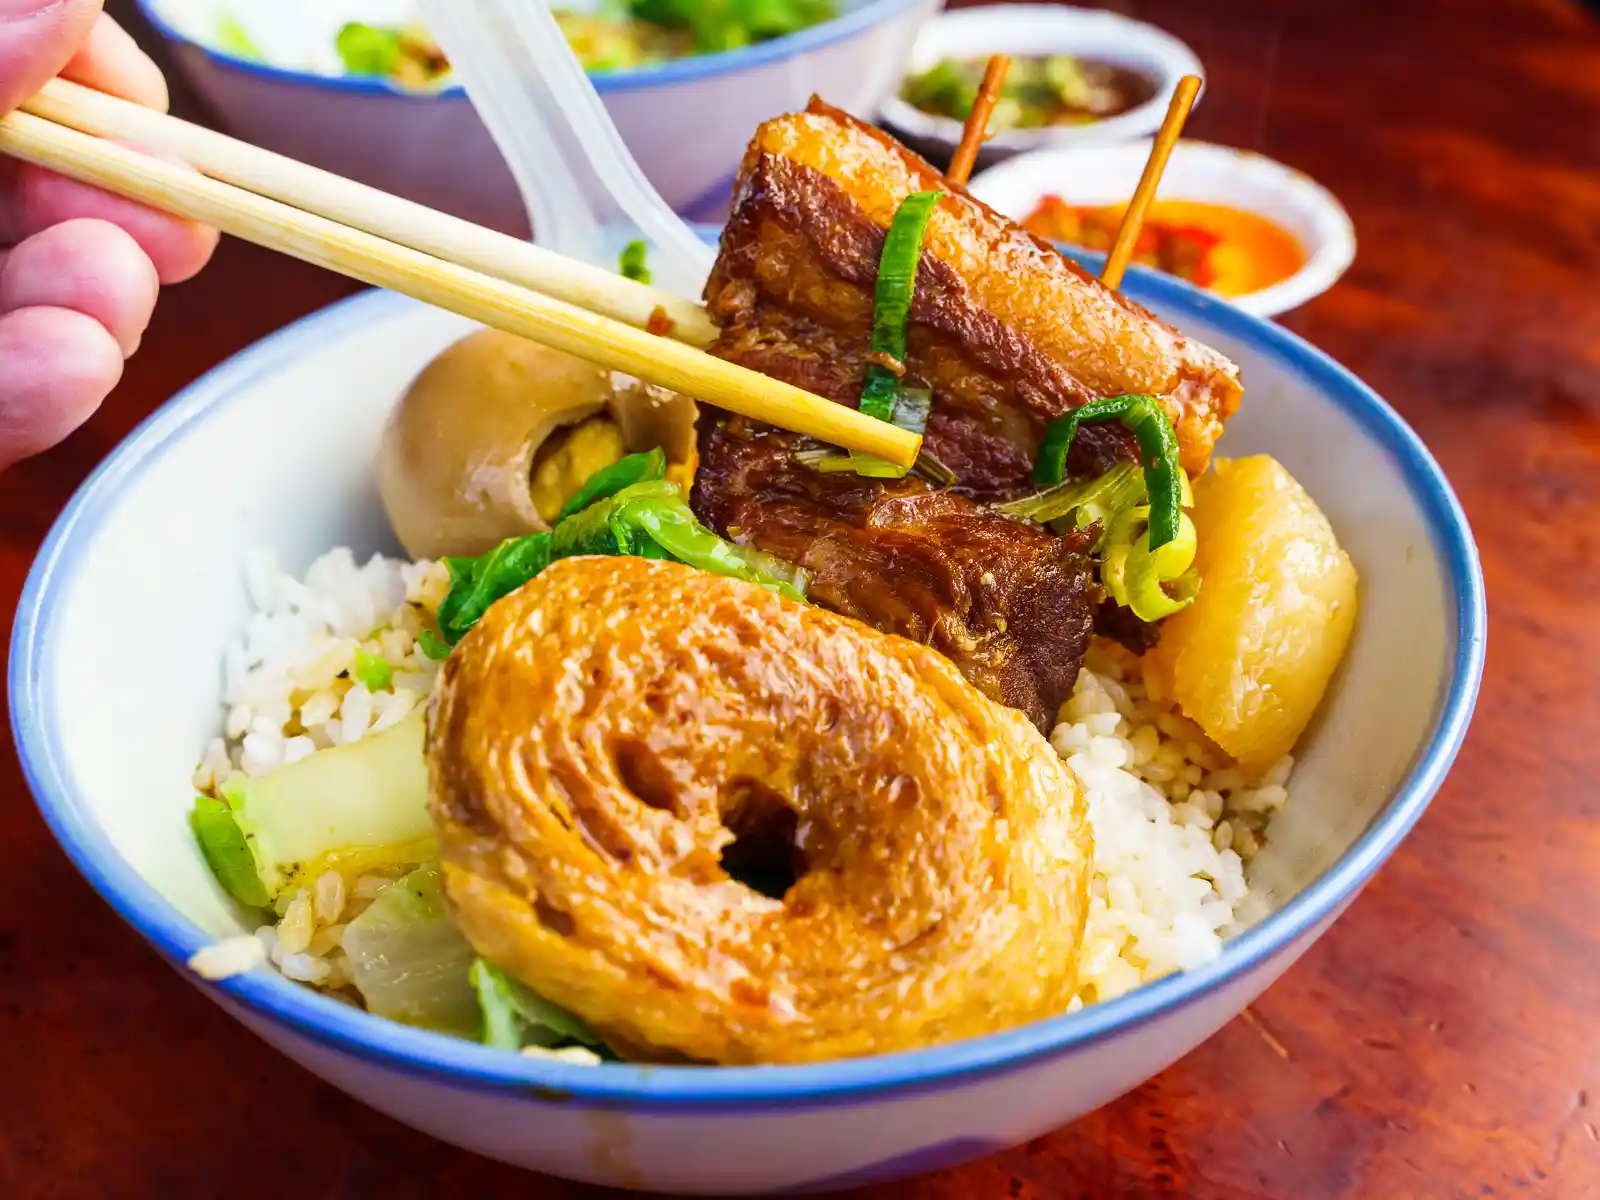 A bowl of rice is topped with juicy braised pork and gluten.